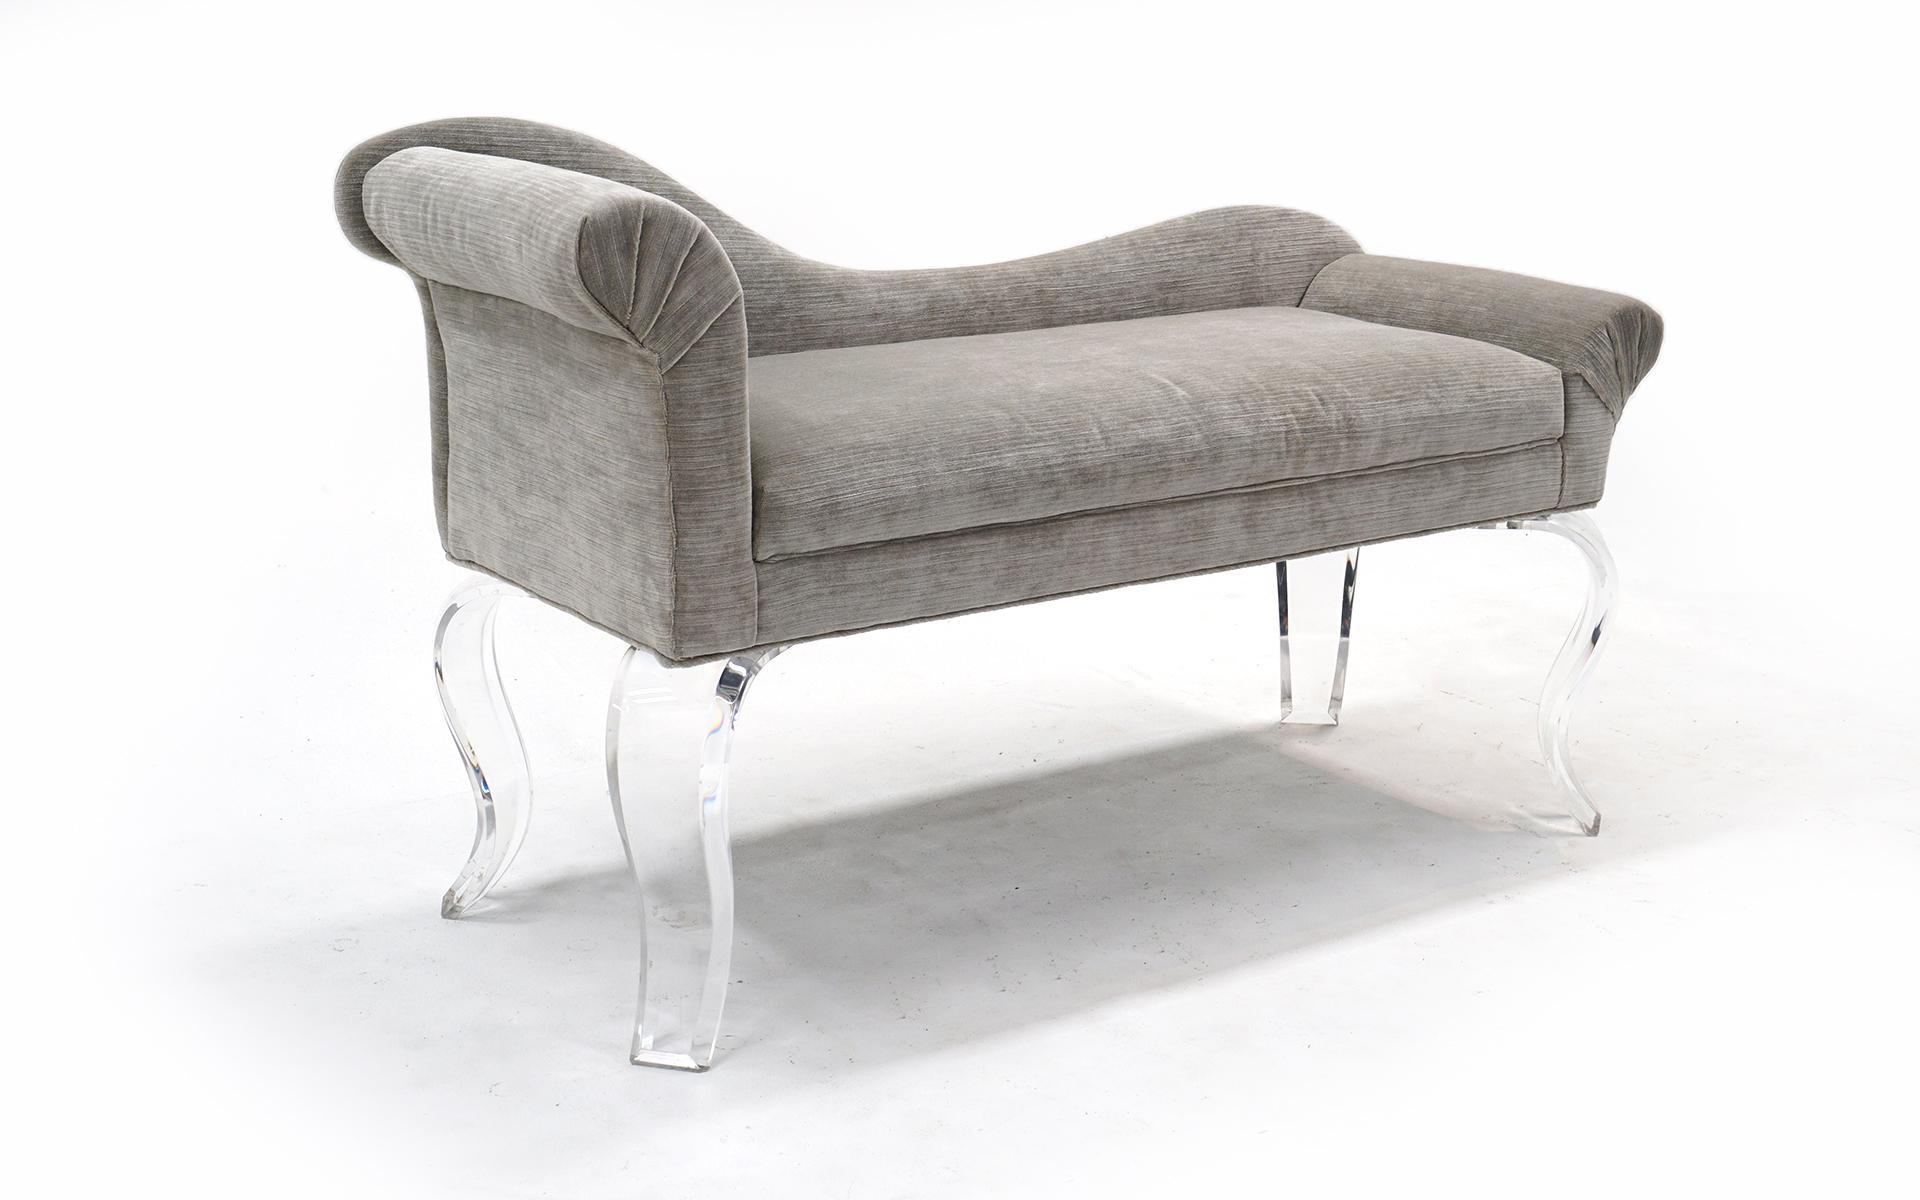 Curved back and arm sculptural recamier / love seat in new light gray upholstery. Thick substantial lucite legs. Very sturdy and in great condition.